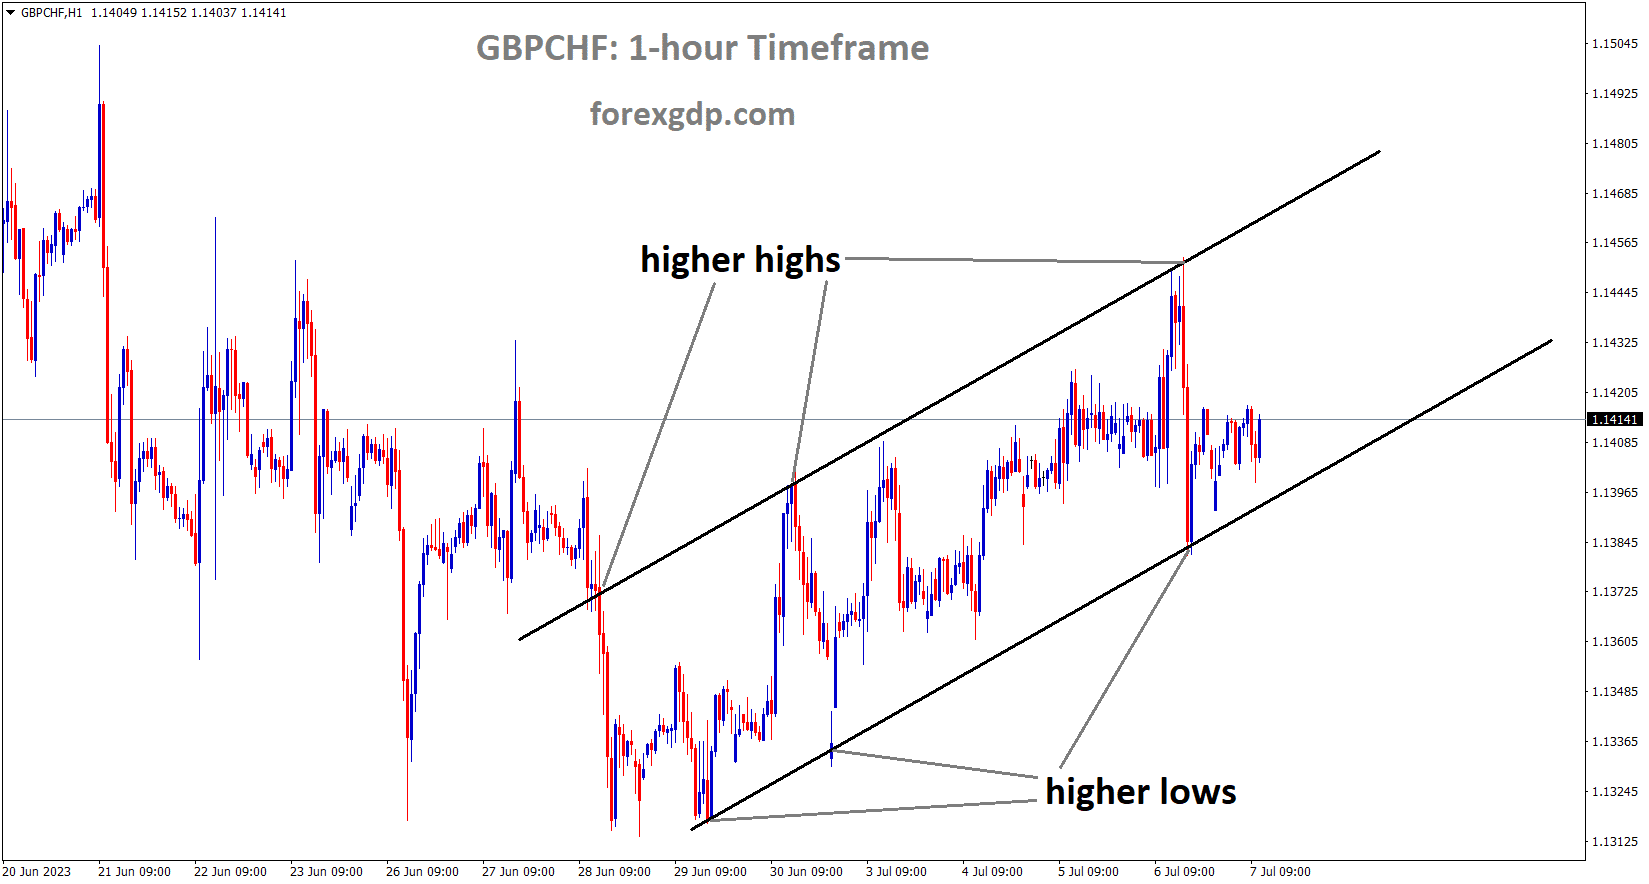 GBPCHF is moving in an Ascending channel and the market has rebounded from the higher low area of the channel 1